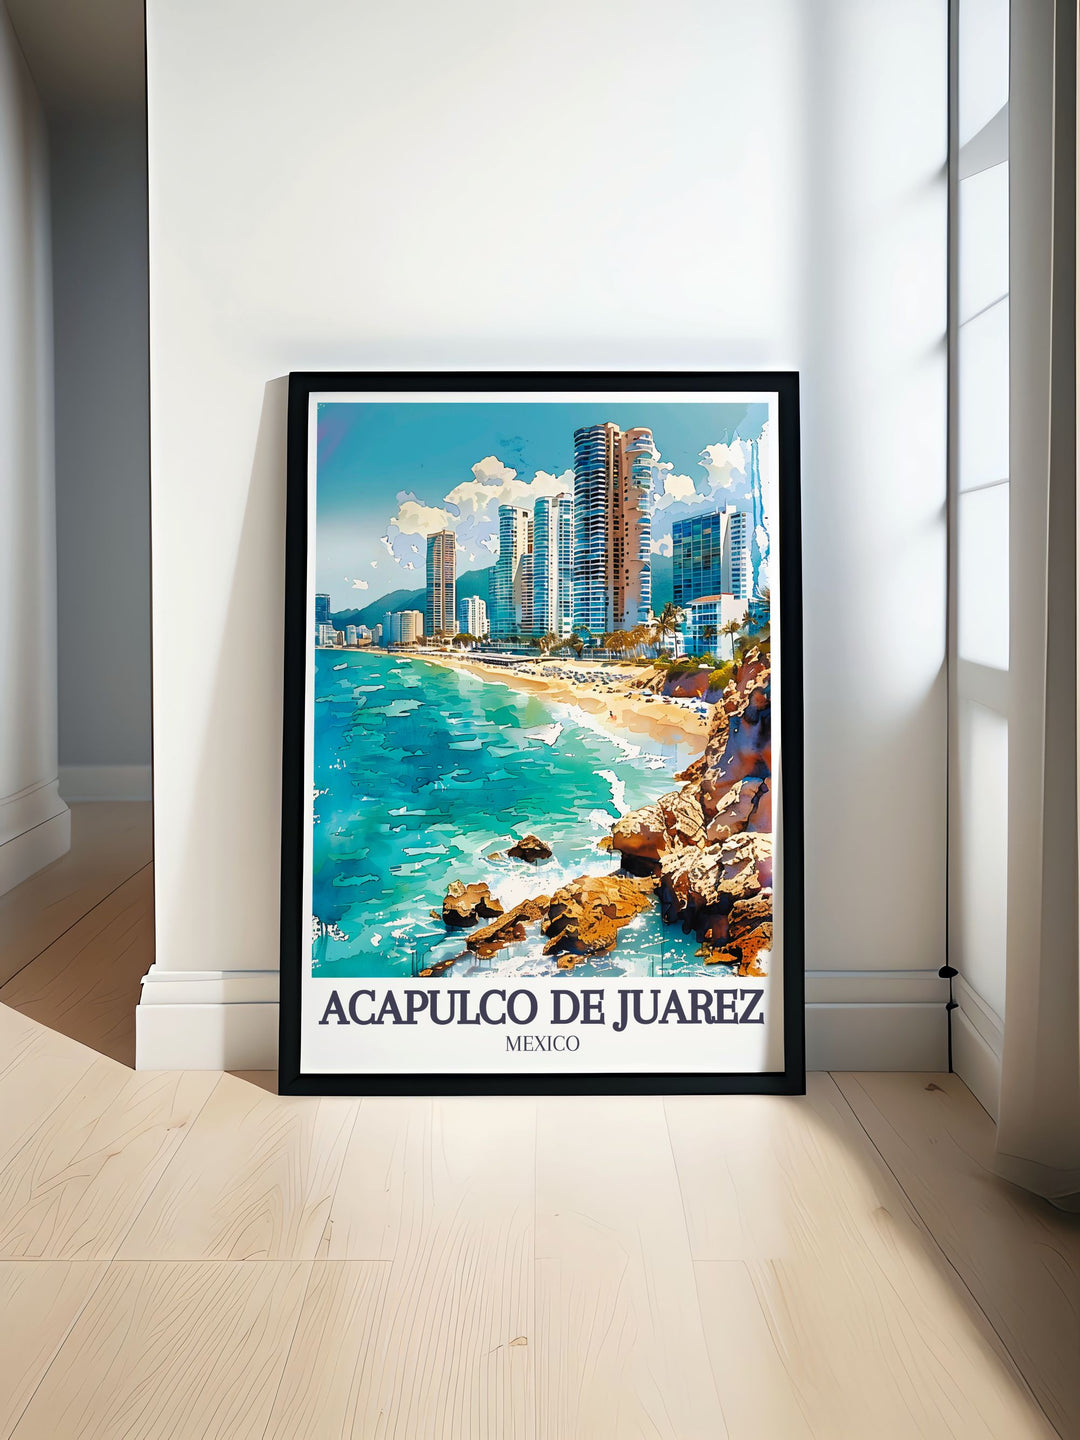 This travel poster of Acapulco de Juárez brings to life the lively atmosphere and scenic landscapes of Playa Condesa and Acapulco Bay, perfect for any art collection.